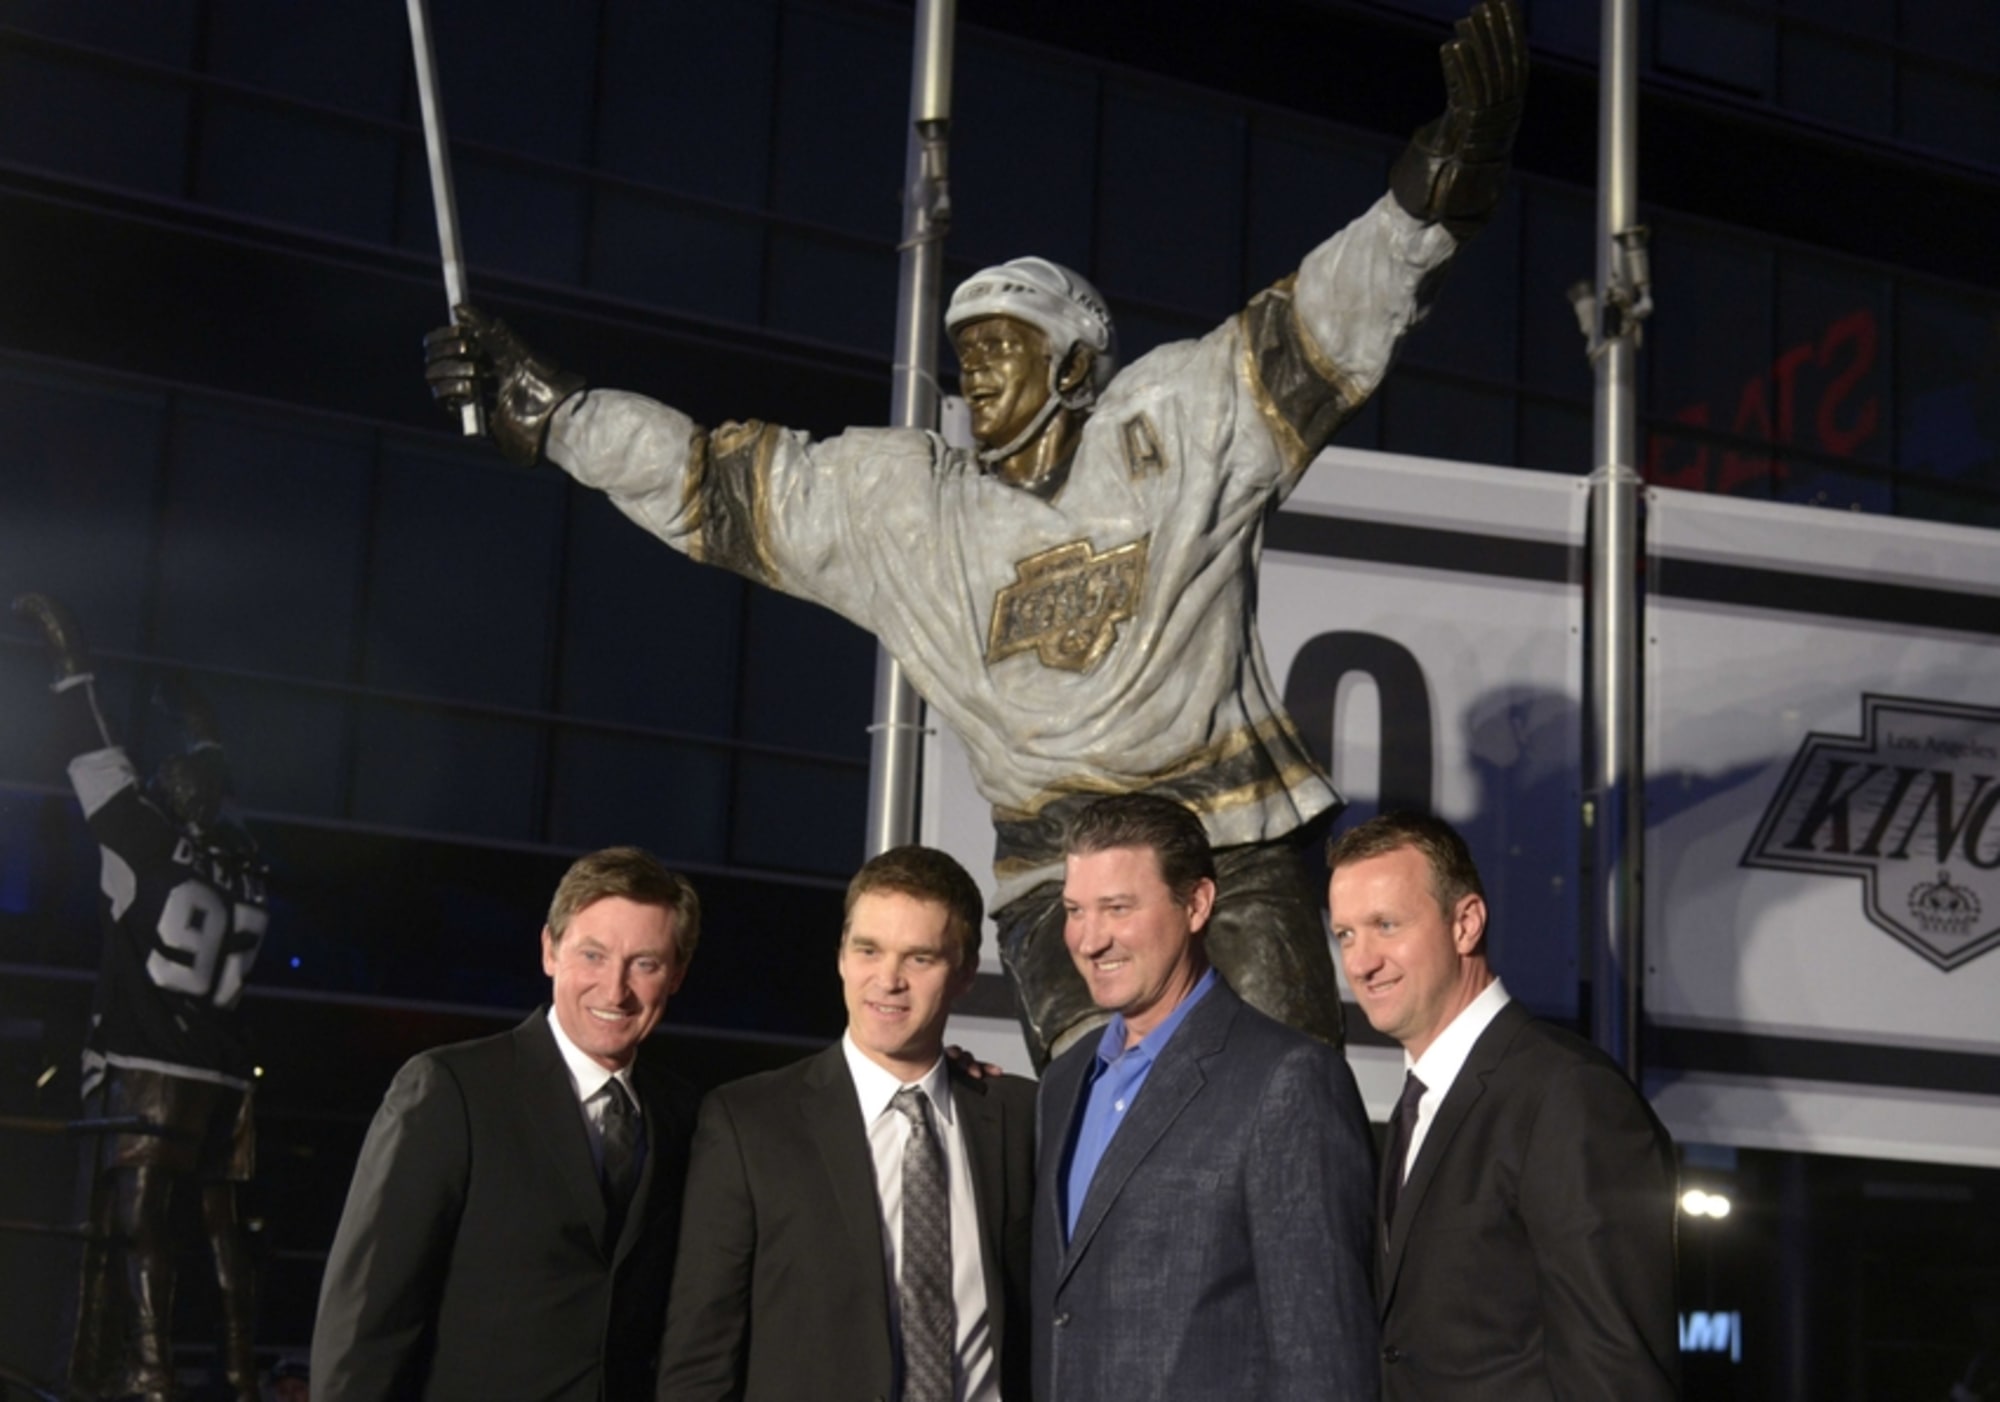 The Wayne Gretzky trade: How great was that? - Los Angeles Times